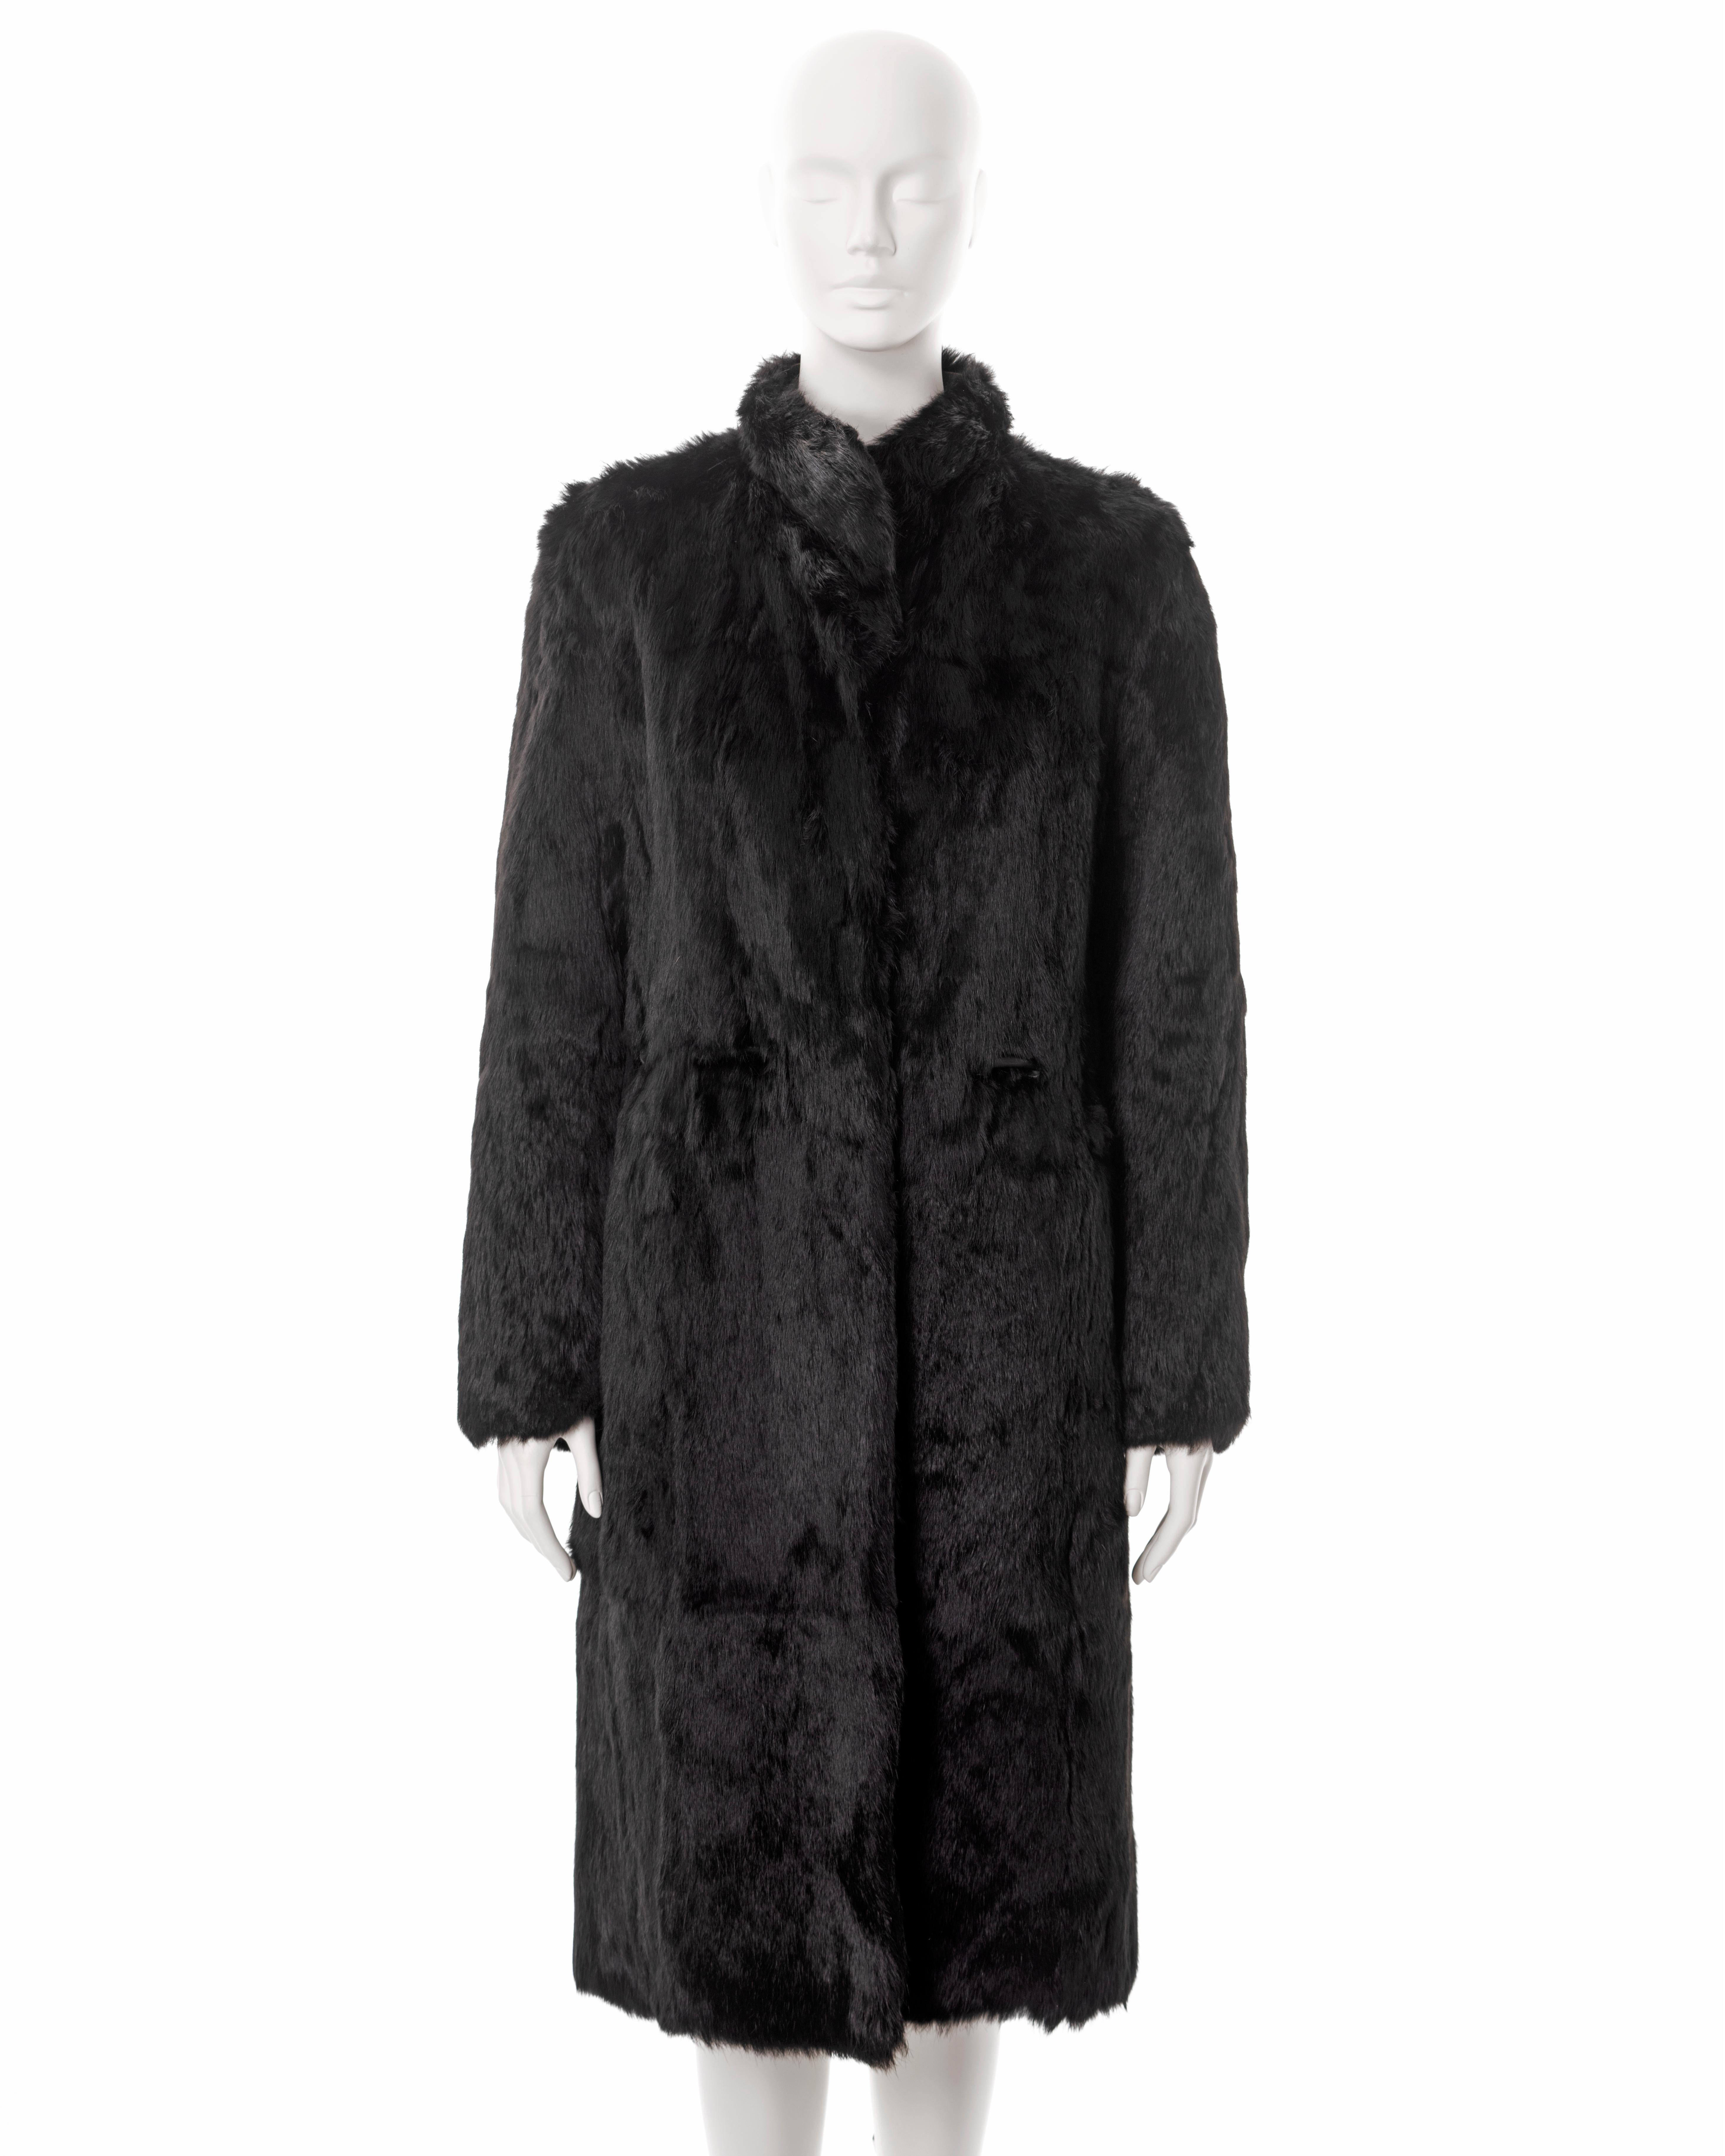 Gucci by Tom Ford reversible green and black fur coat, fw 1999 For Sale 11